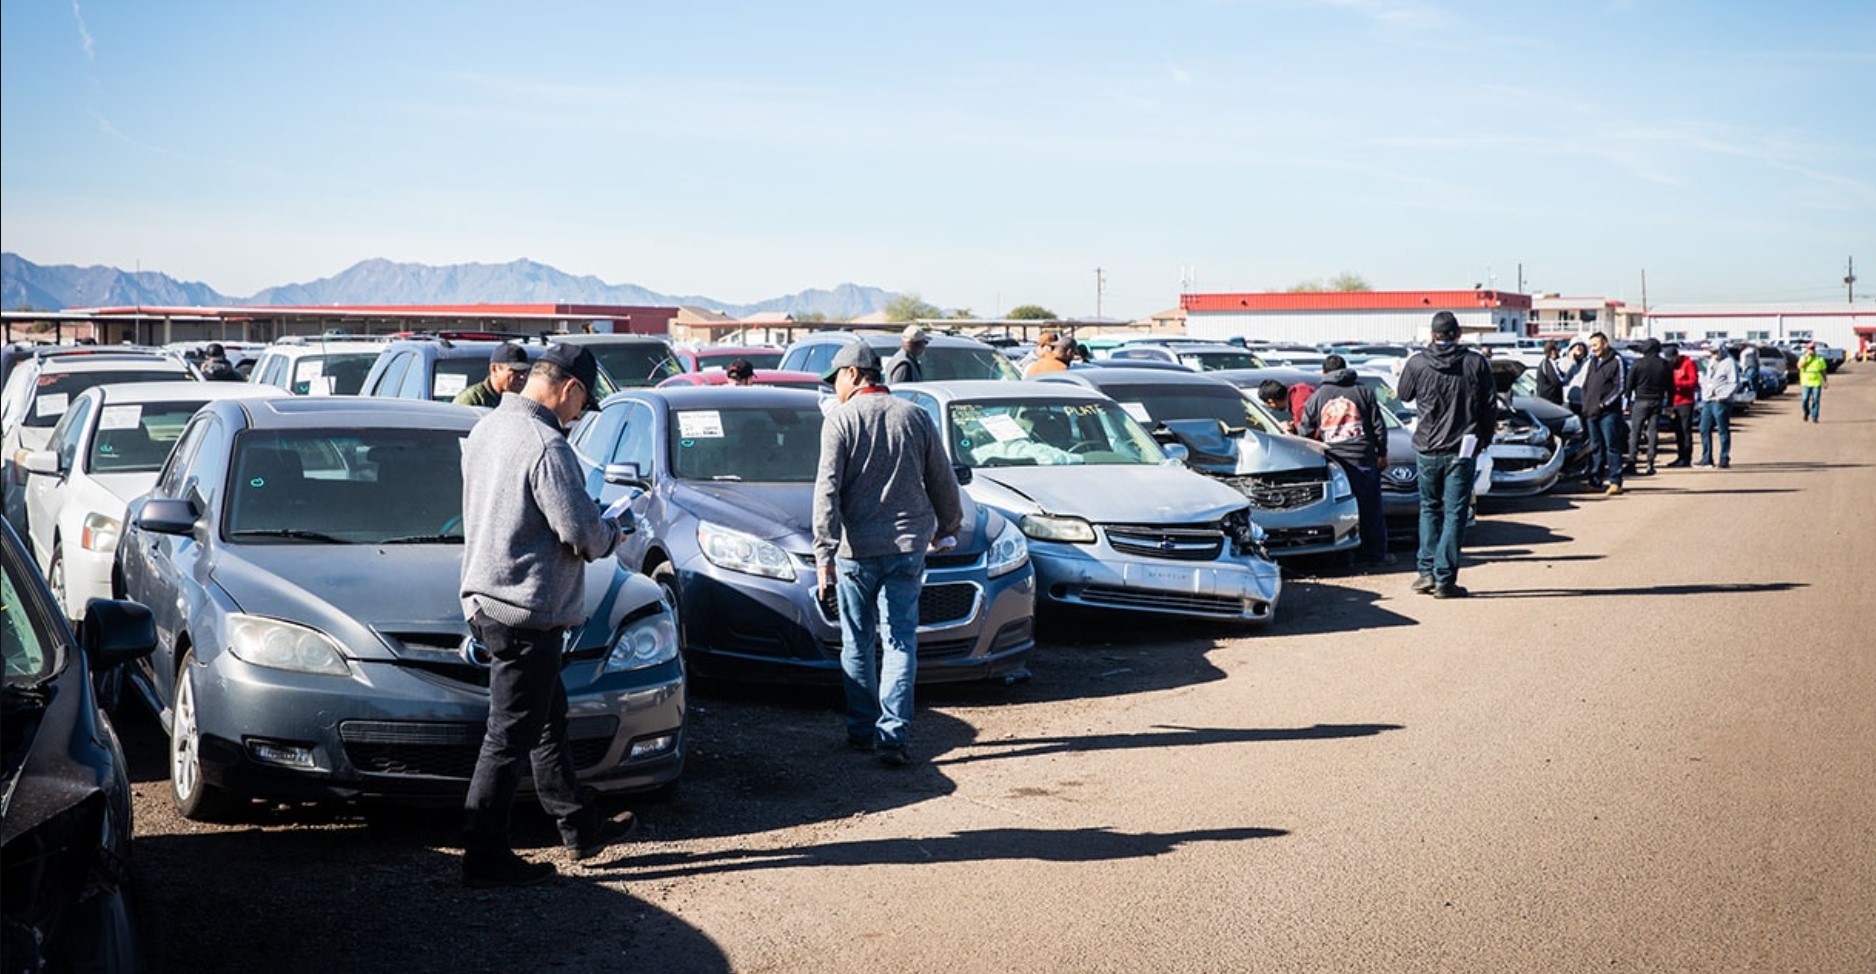 How do insurance auto auctions work